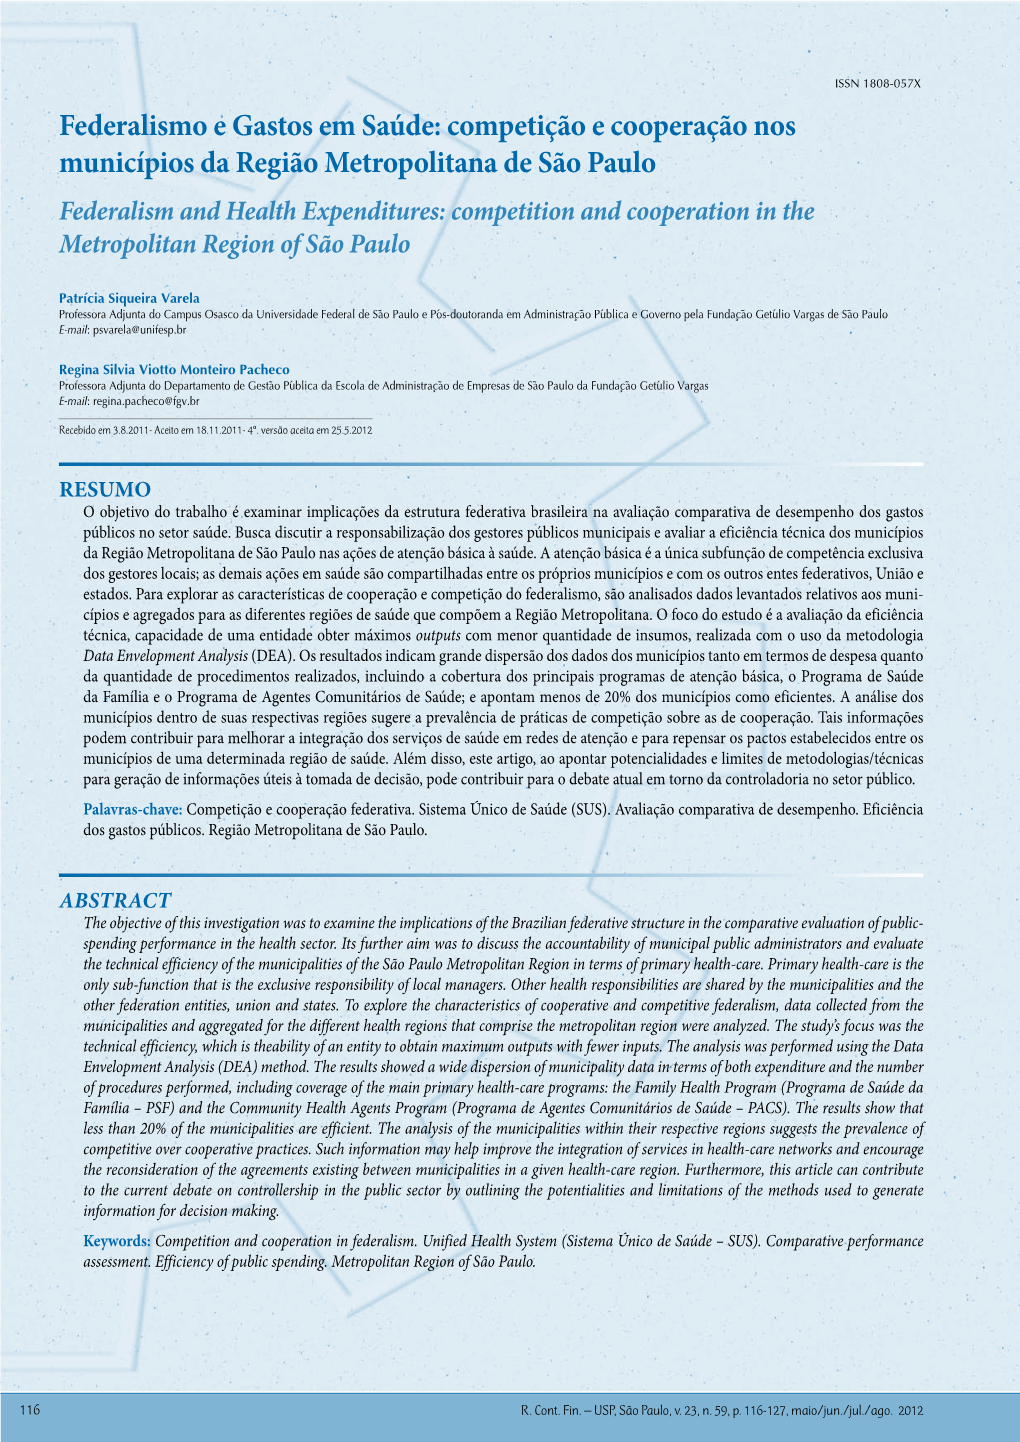 Federalism and Health Expenditures: Competition and Cooperation in the Metropolitan Region of São Paulo